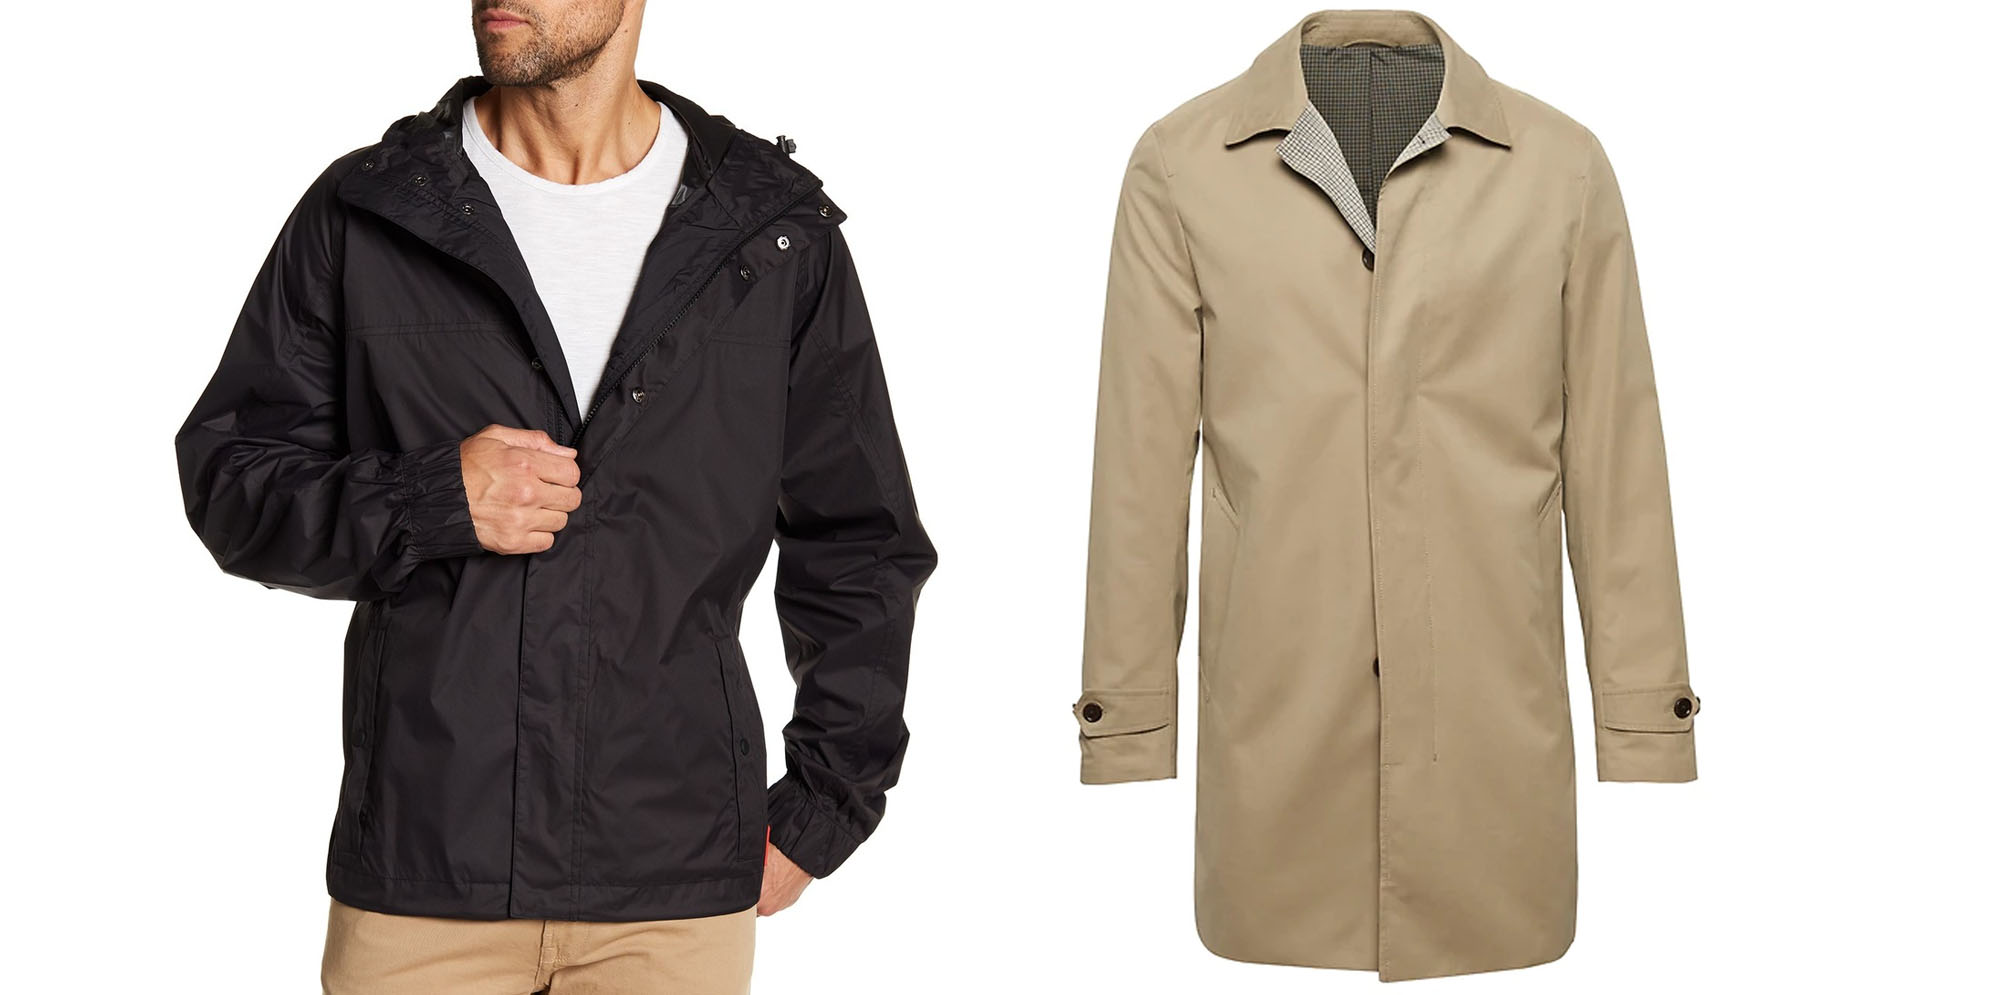 The Best Spring Rain Jackets for Men to Keep you Dry - 9to5Toys